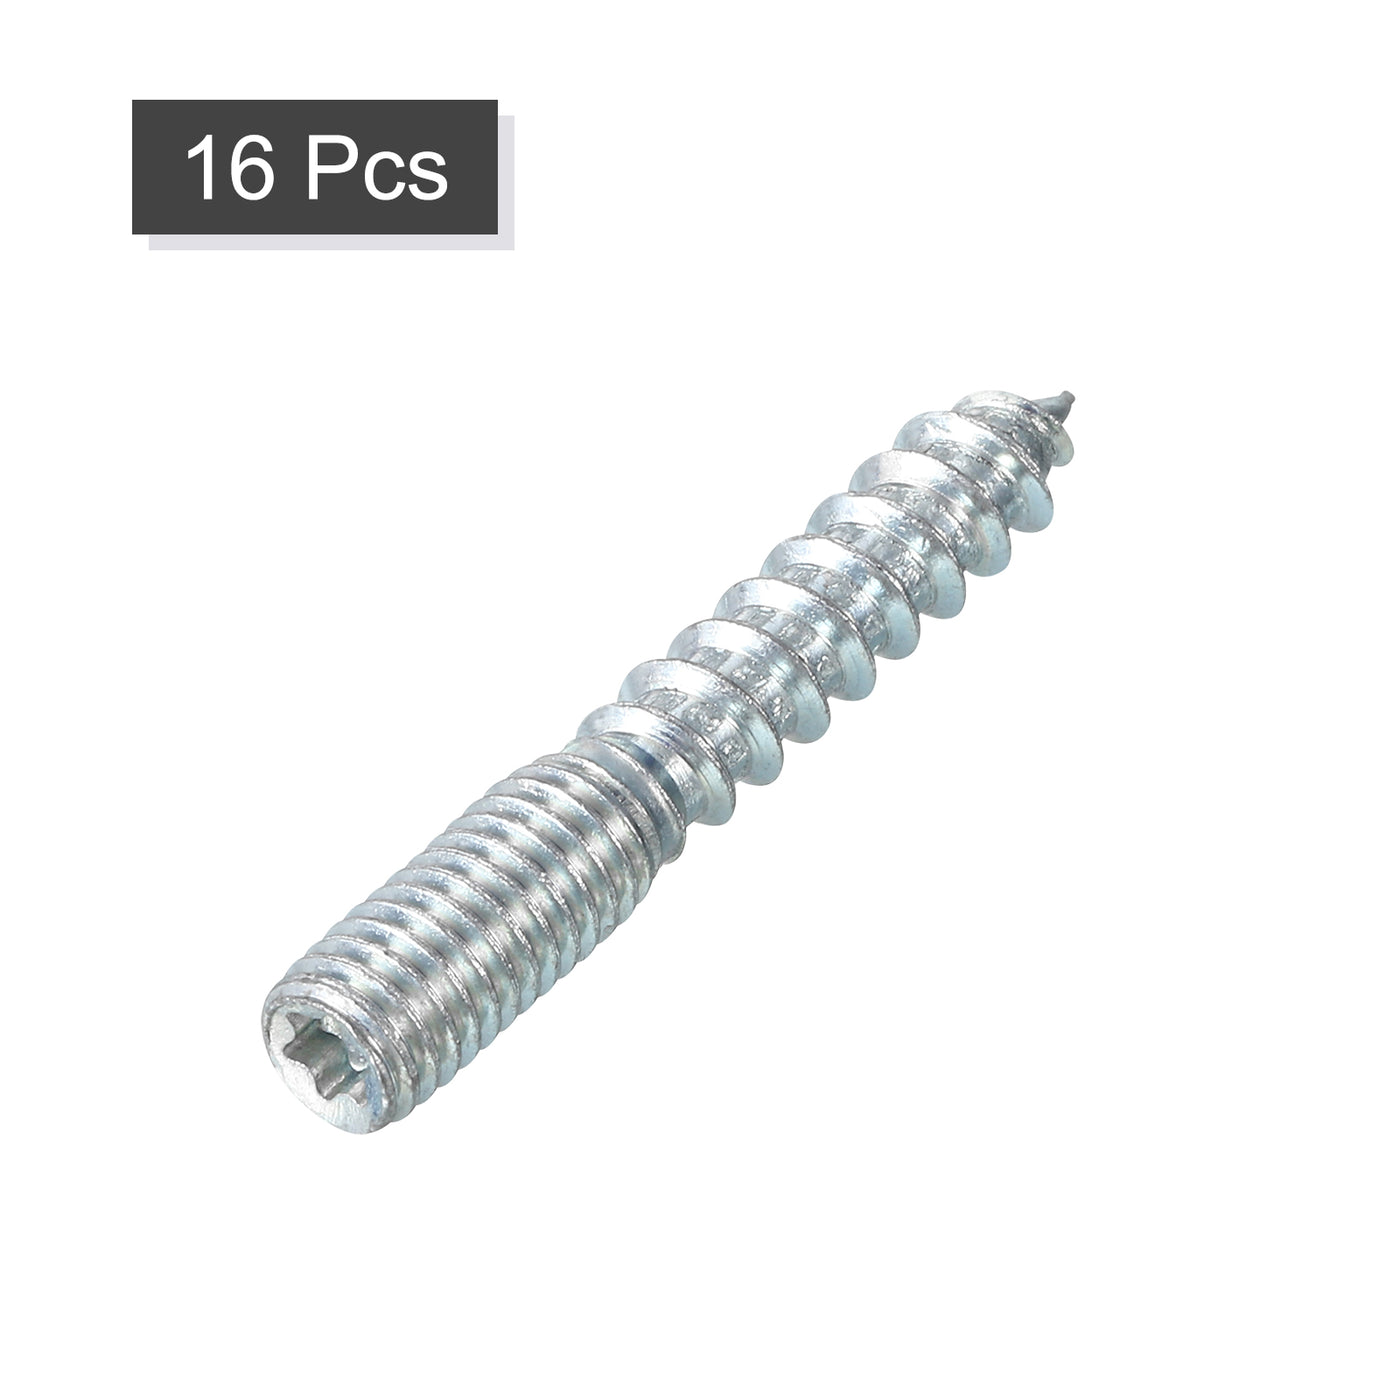 uxcell Uxcell 16Pcs M8x50mm Hanger Bolt Double Headed Bolt Self-Tapping Screw for Furniture